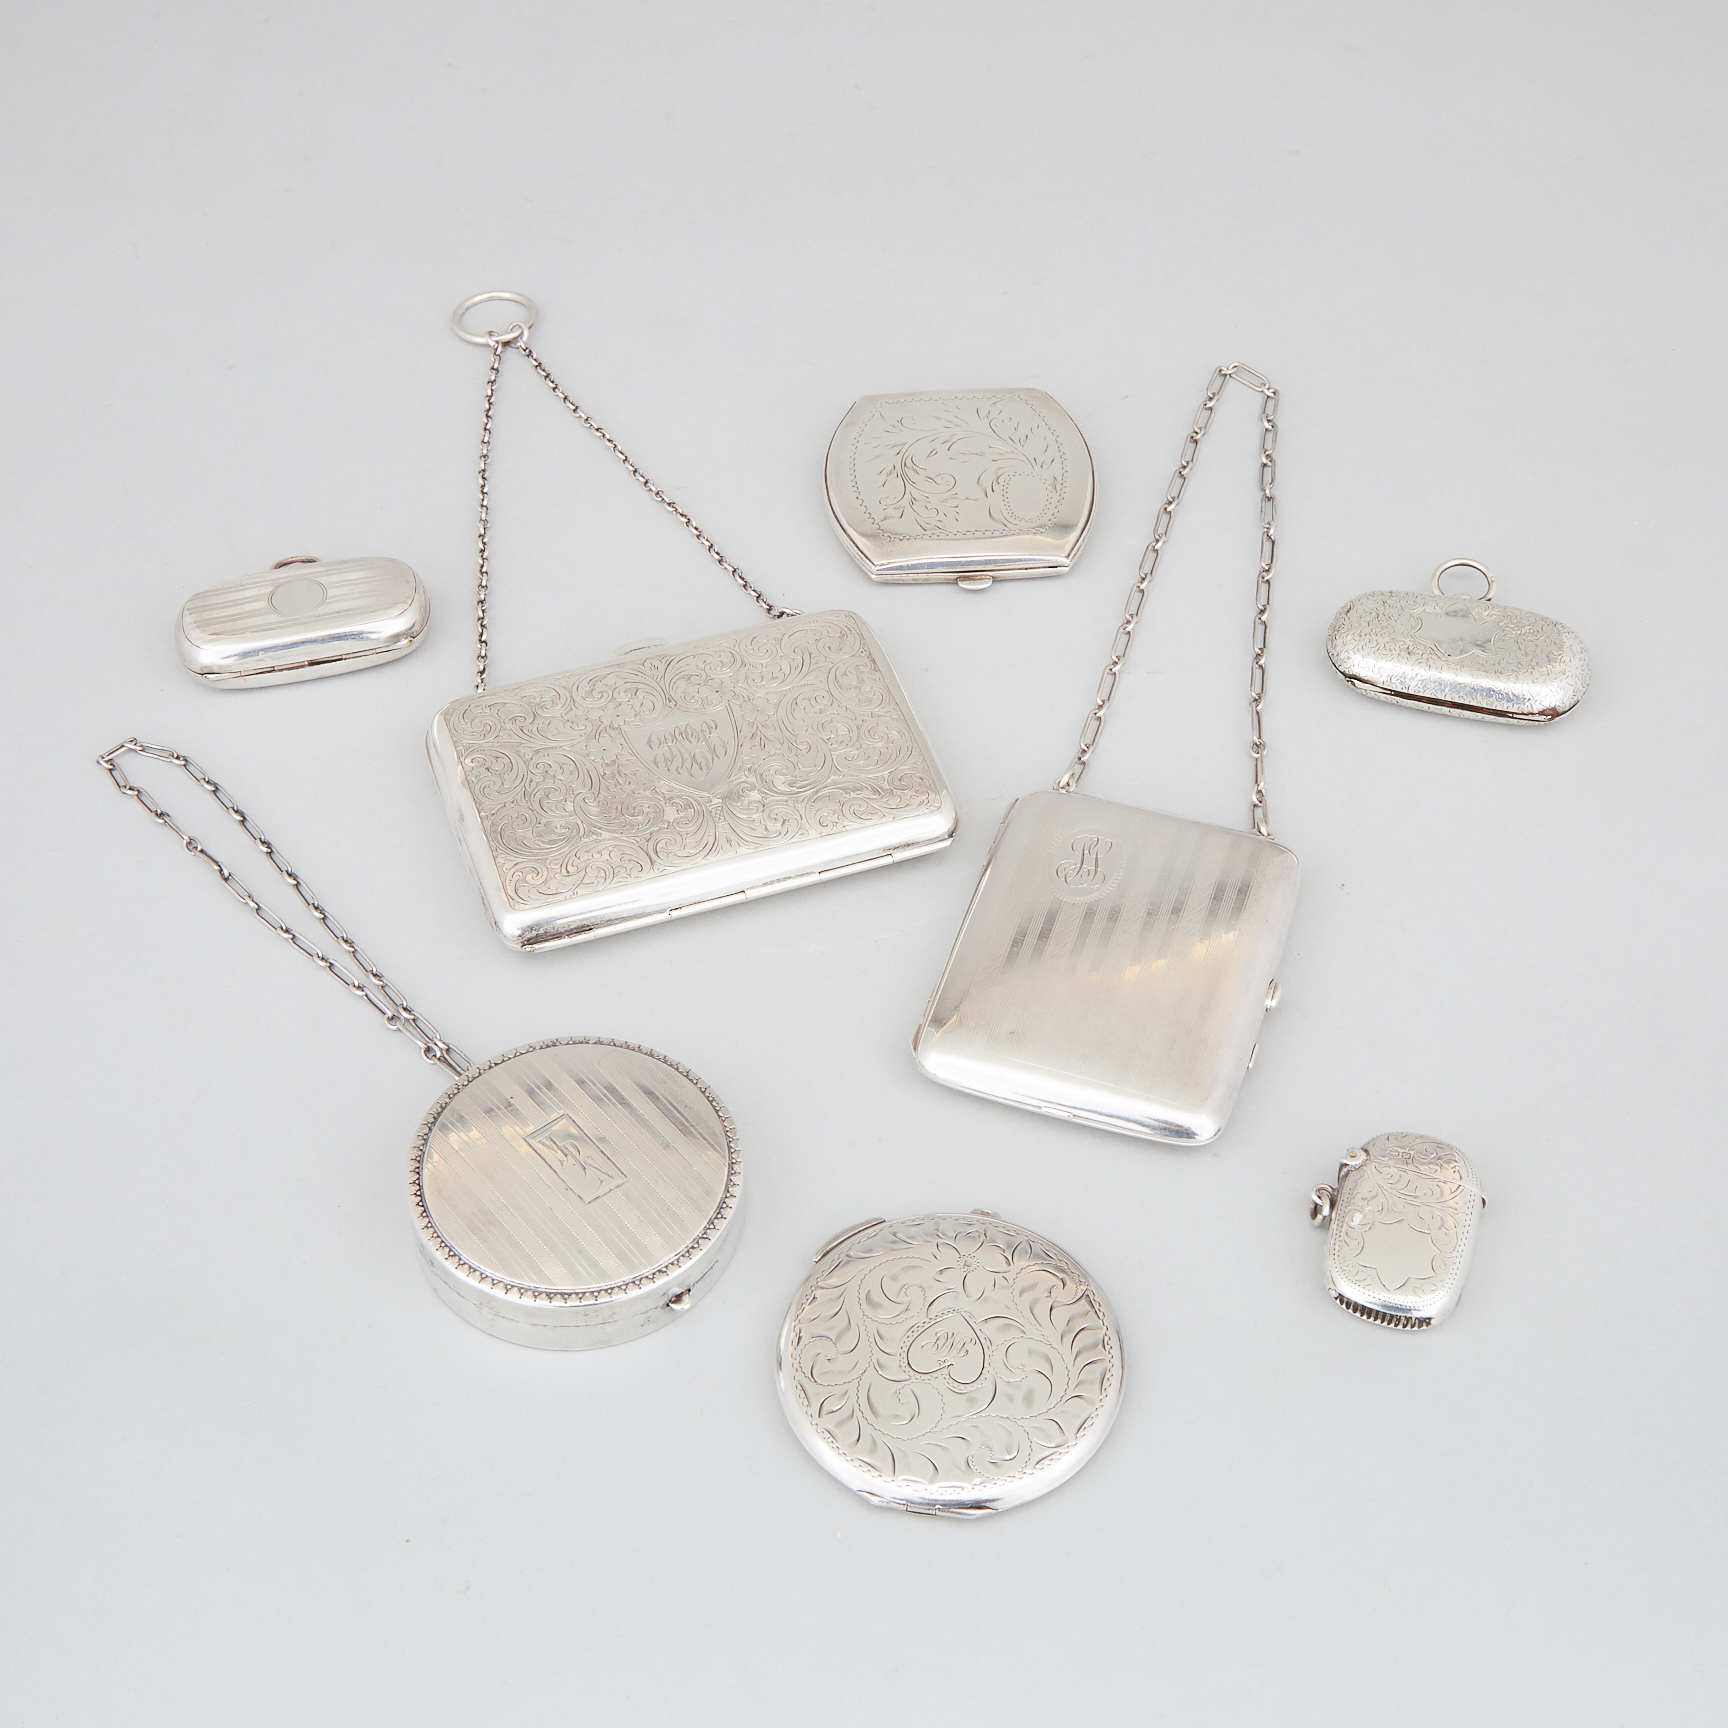 Eight English and North American Silver Compacts, Purses, Coin and Vesta Cases, 20th century